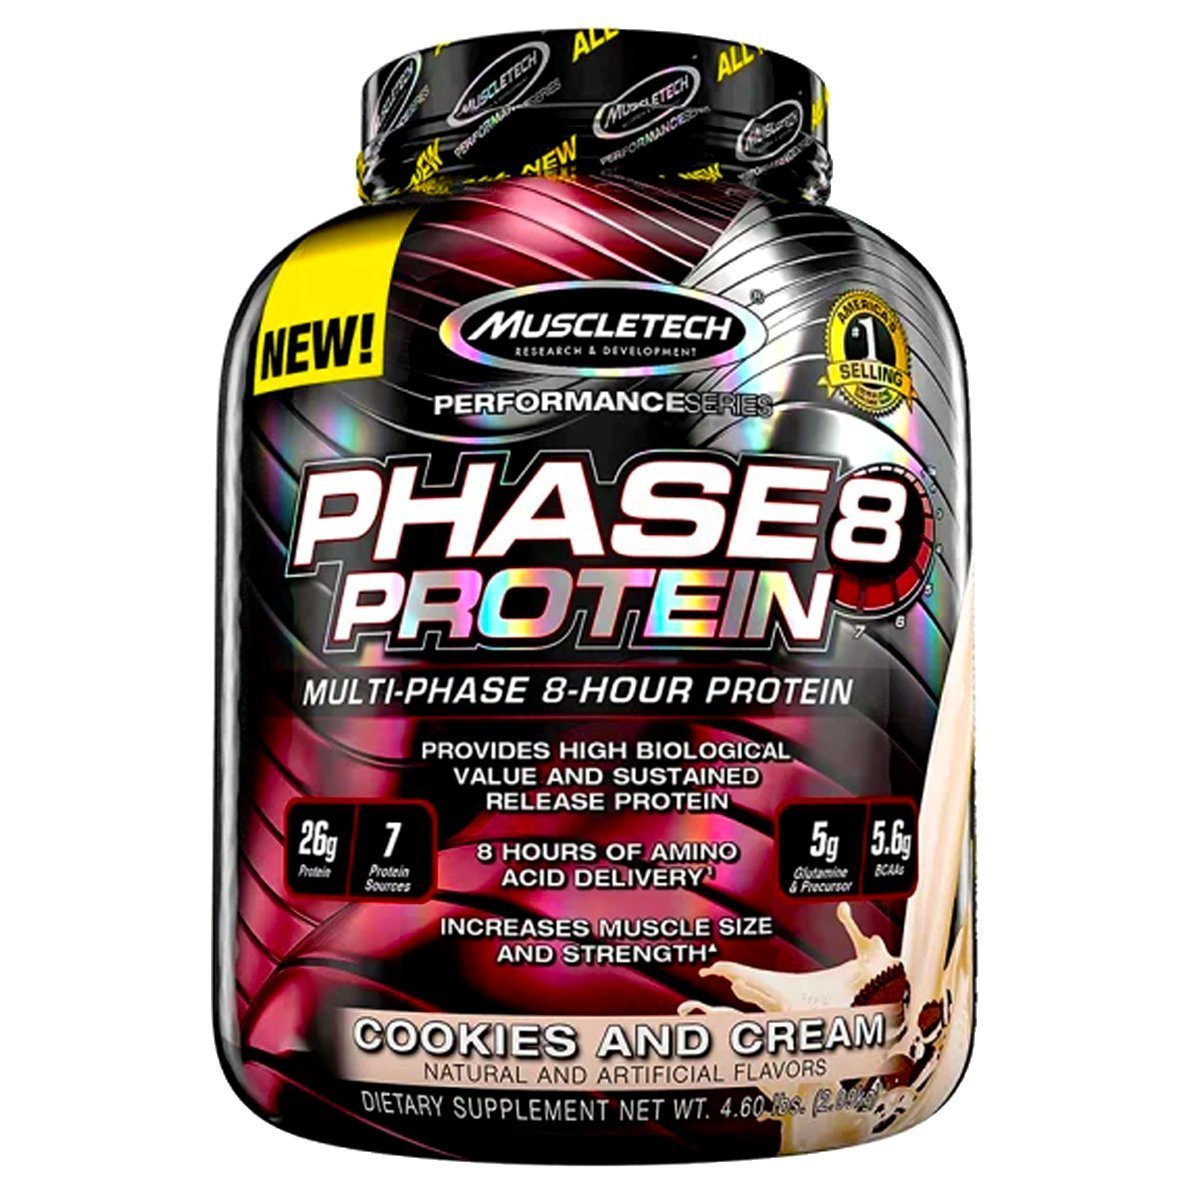 Muscletech Performance series Phase 8